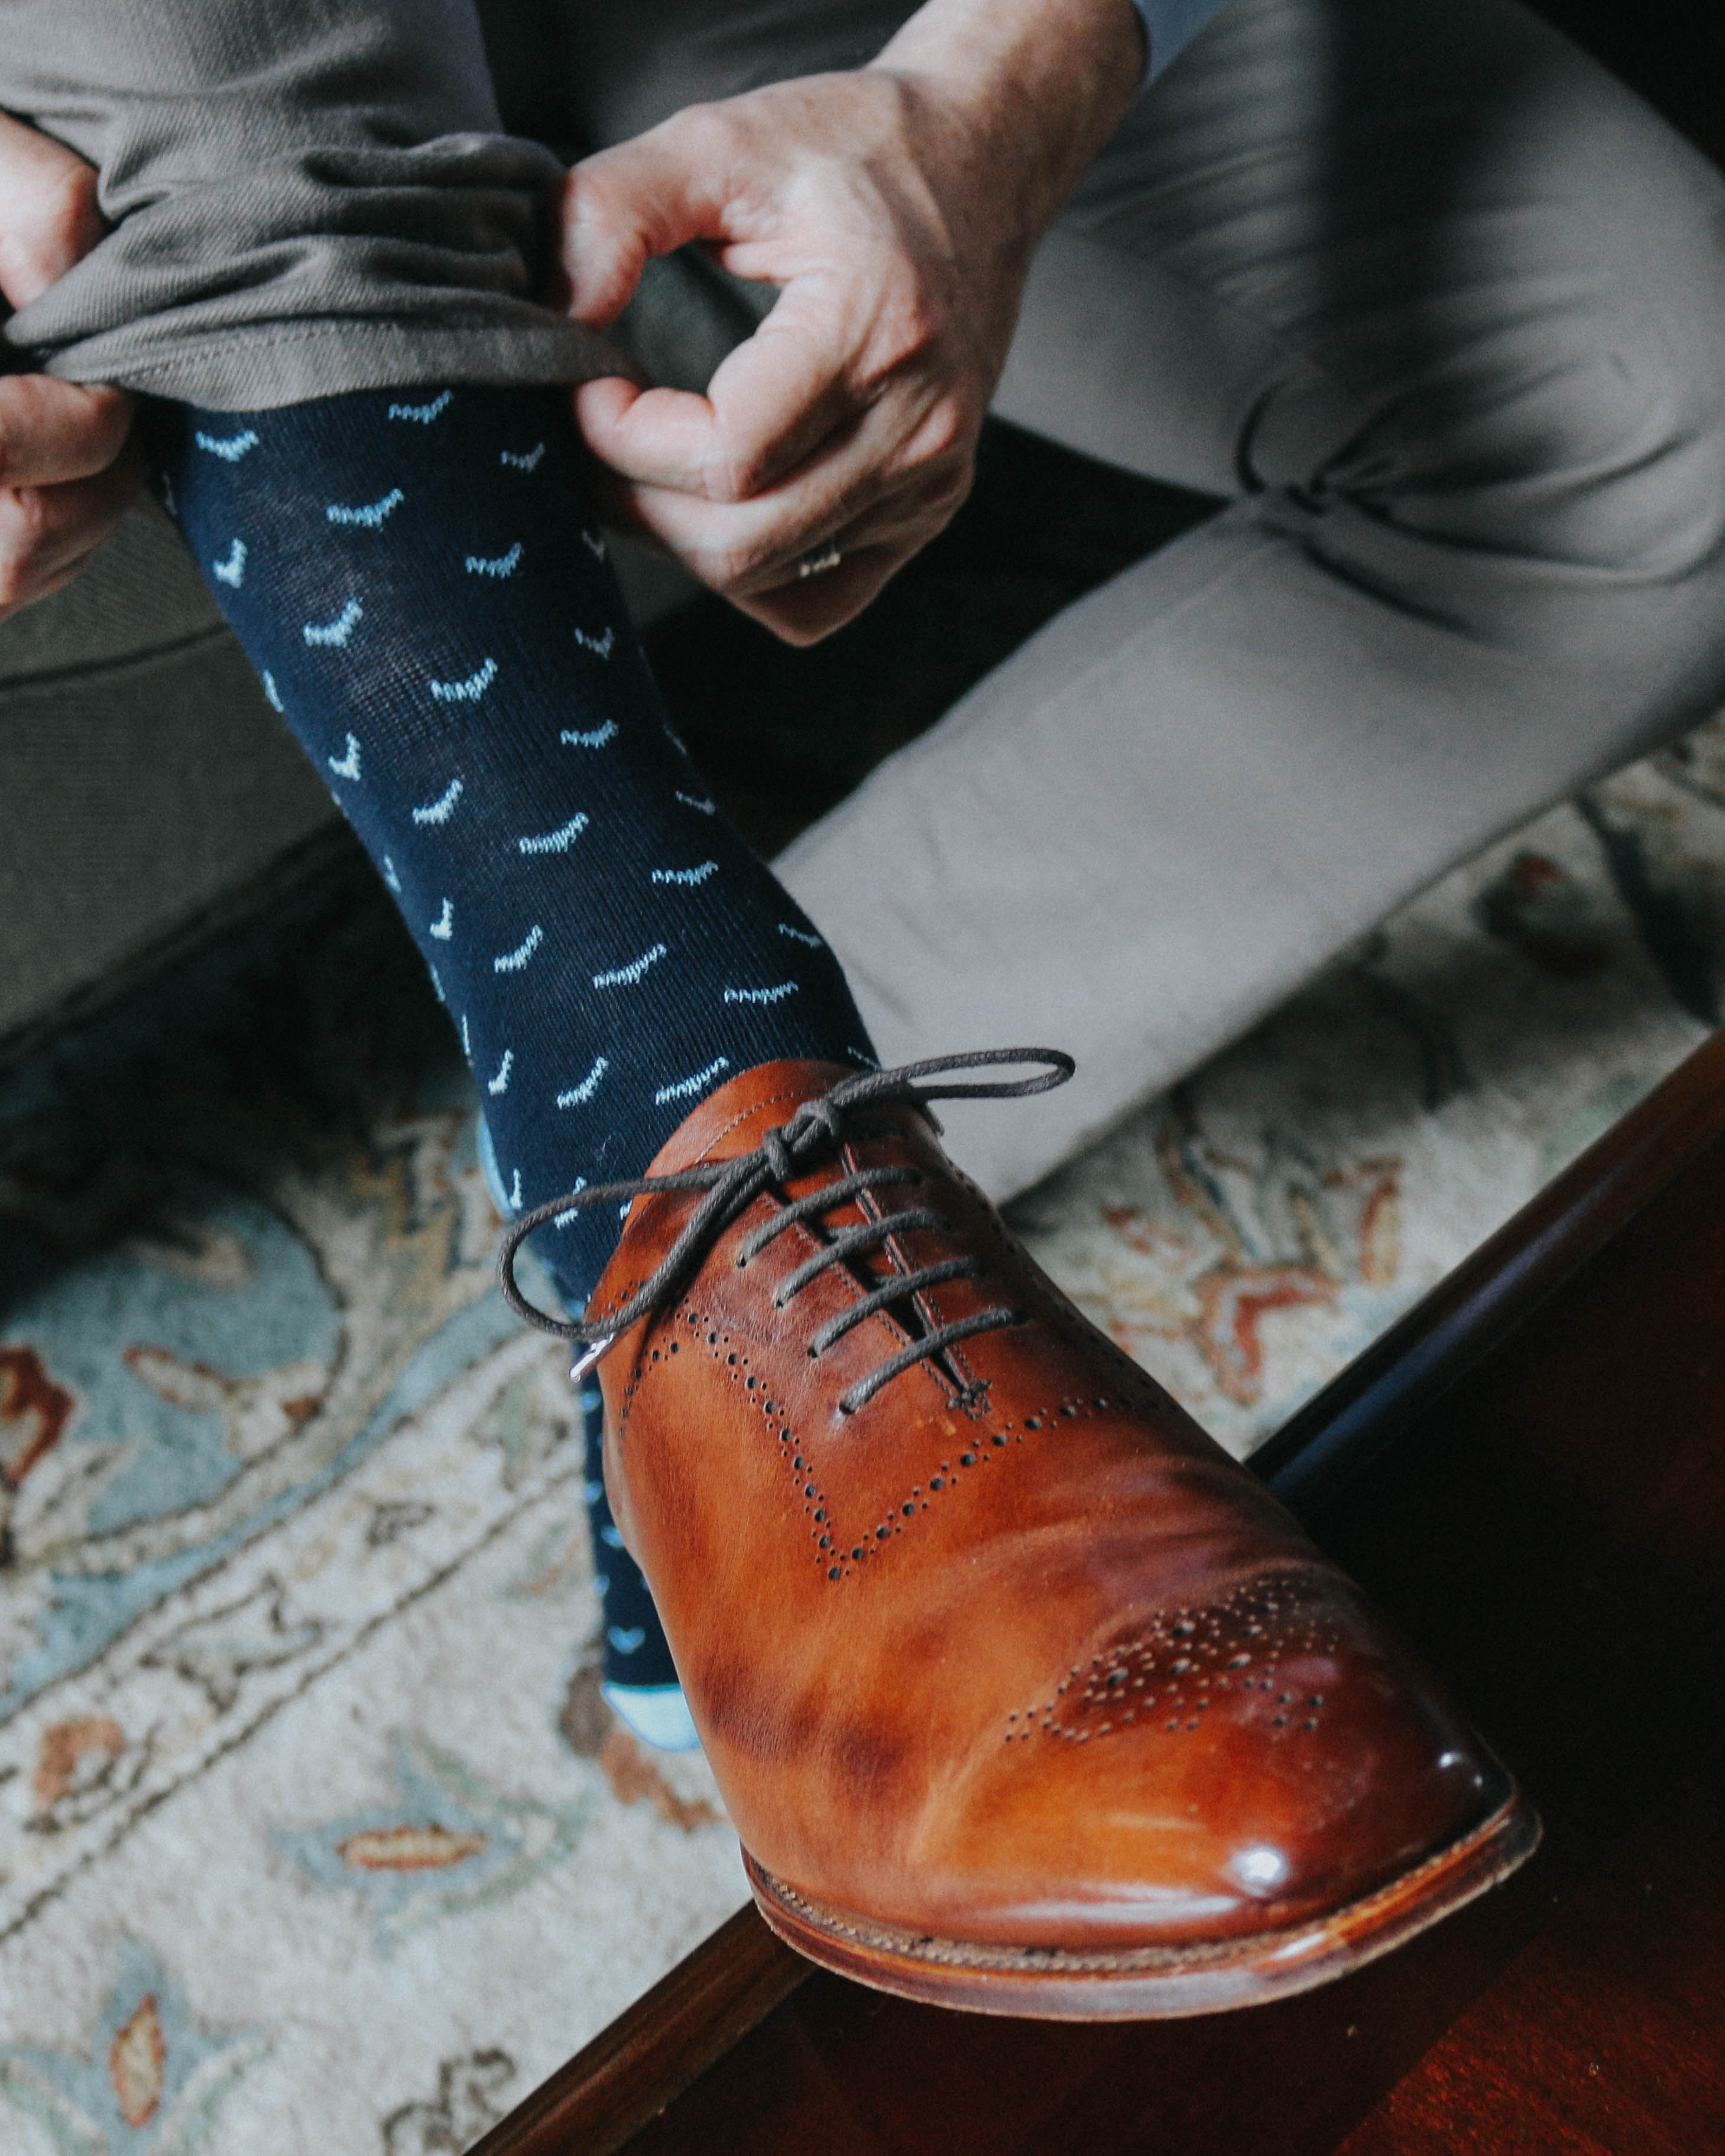 blue over the calf dress socks with light blue print, brown dress shoe with grey laces, grey dress pants